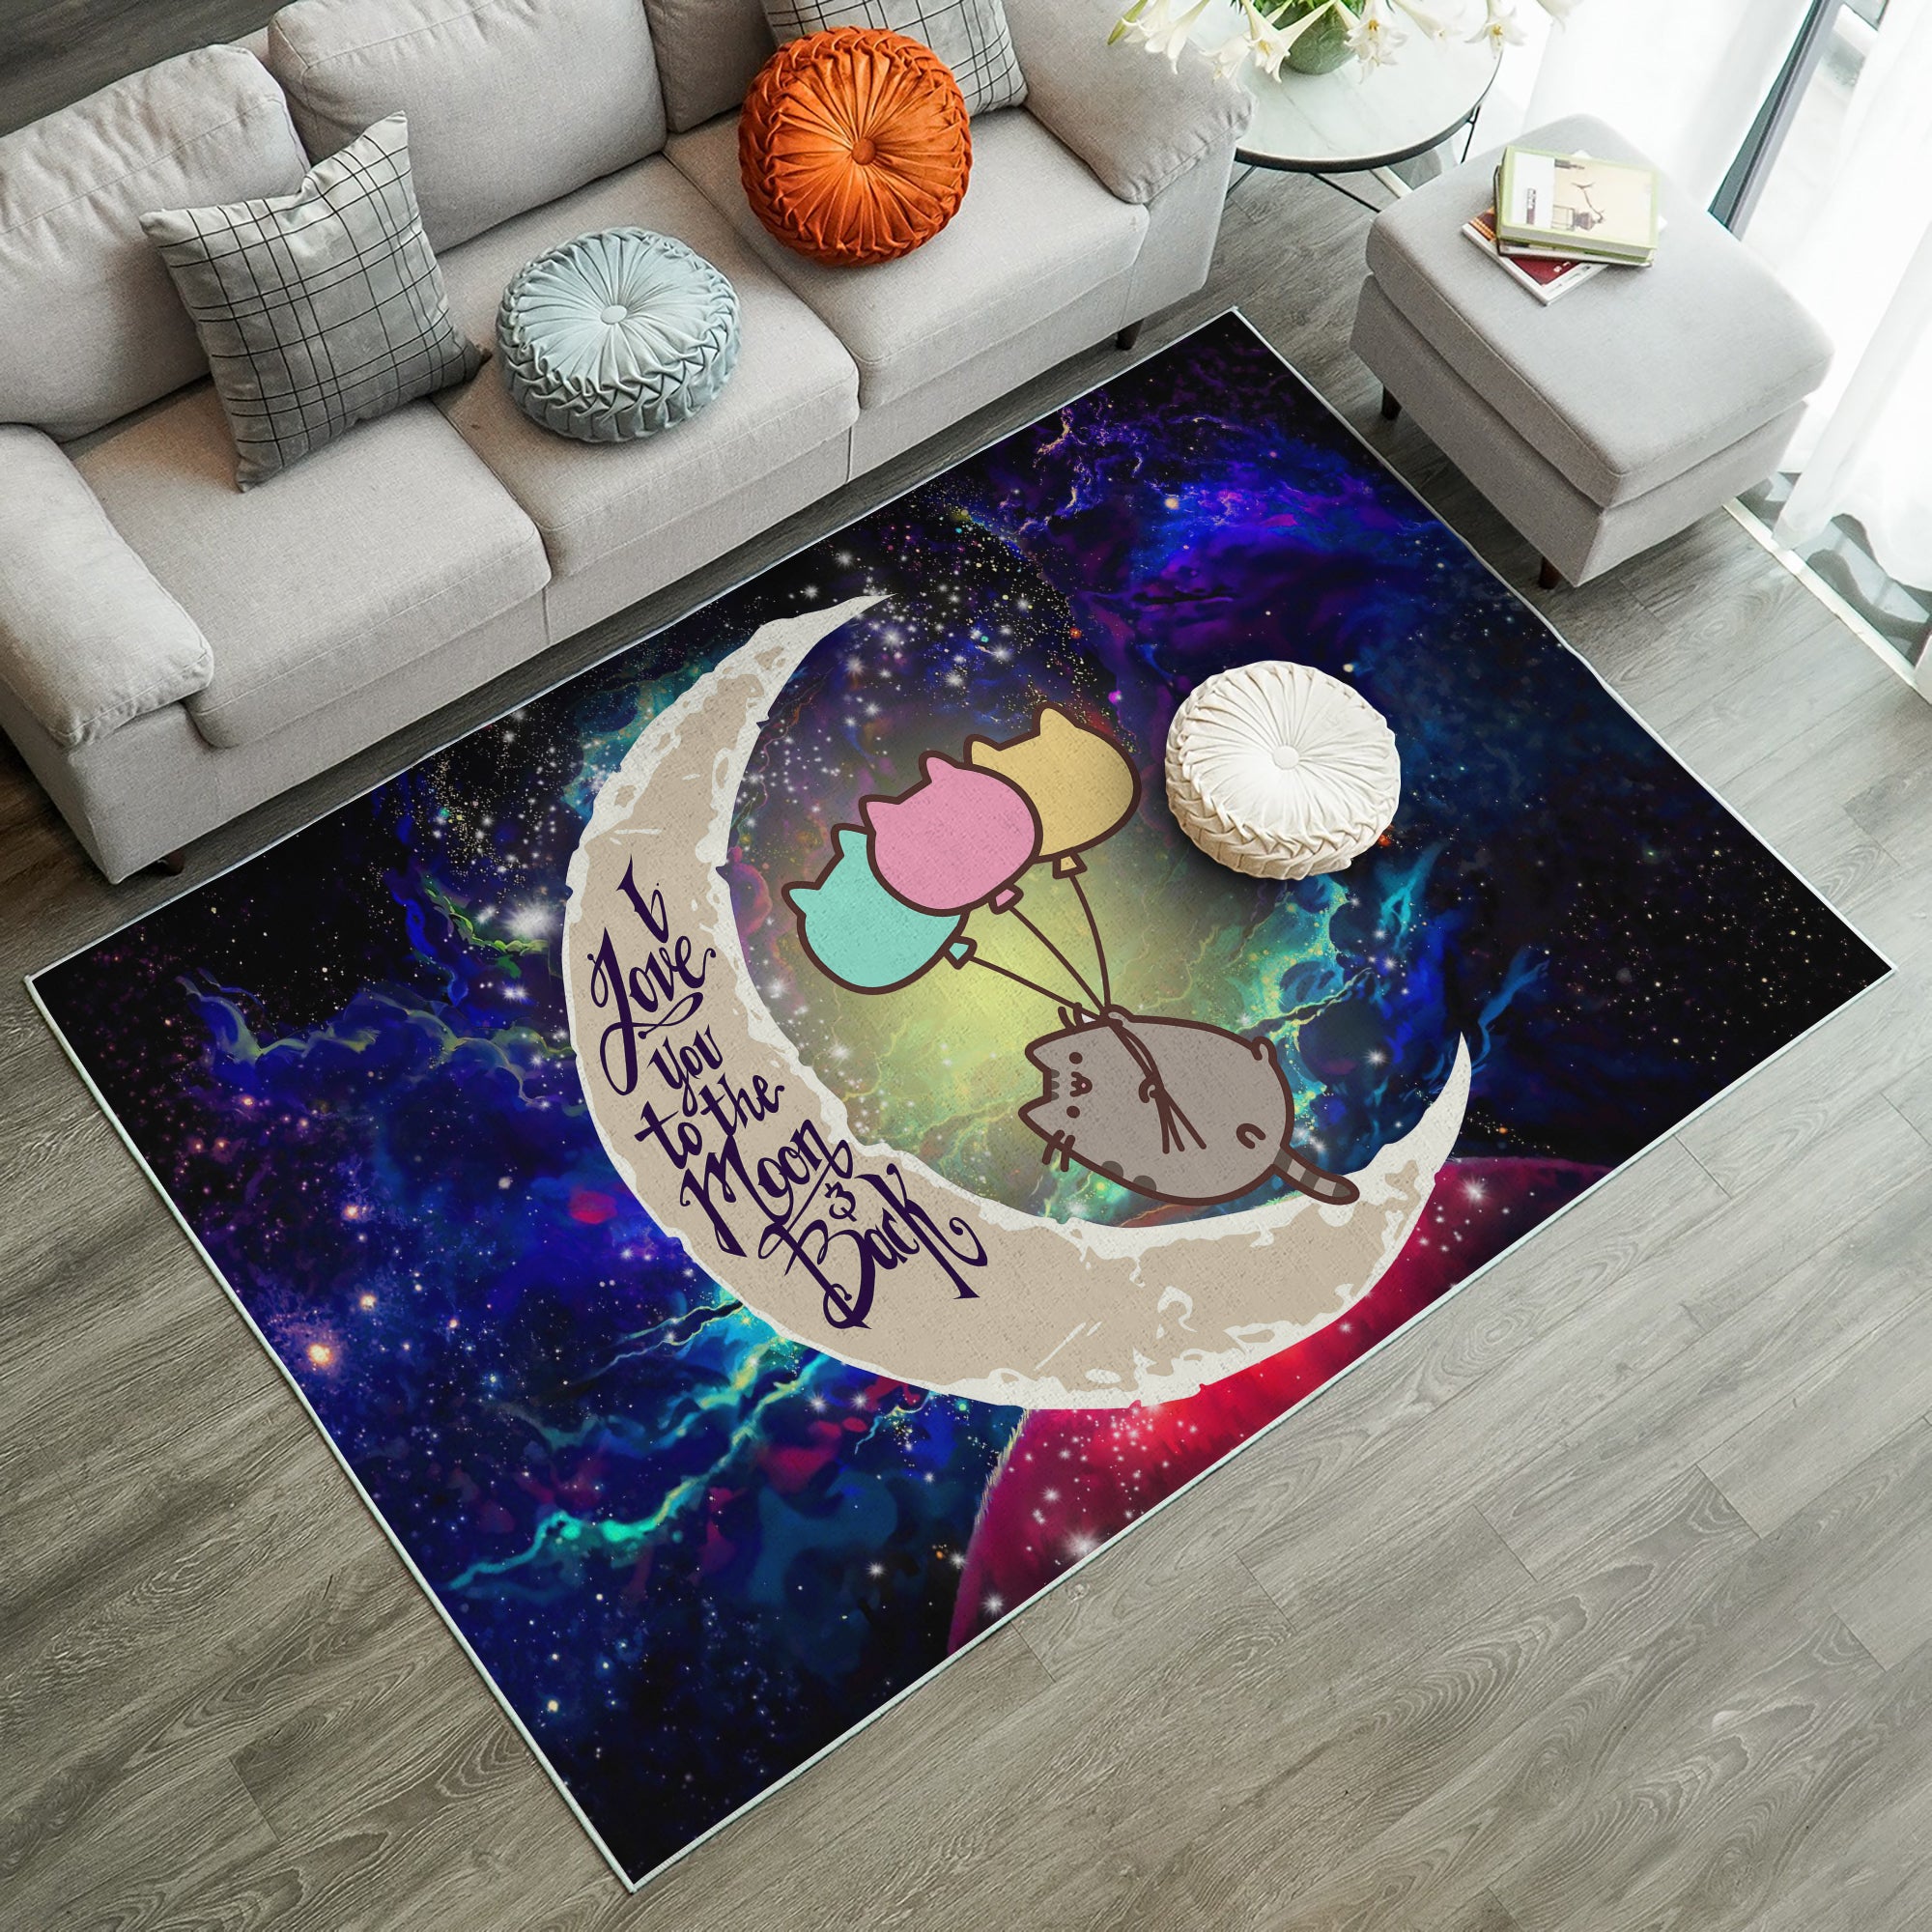 Pusheen Cat Love You To The Moon Galaxy Carpet Rug Home Room Decor